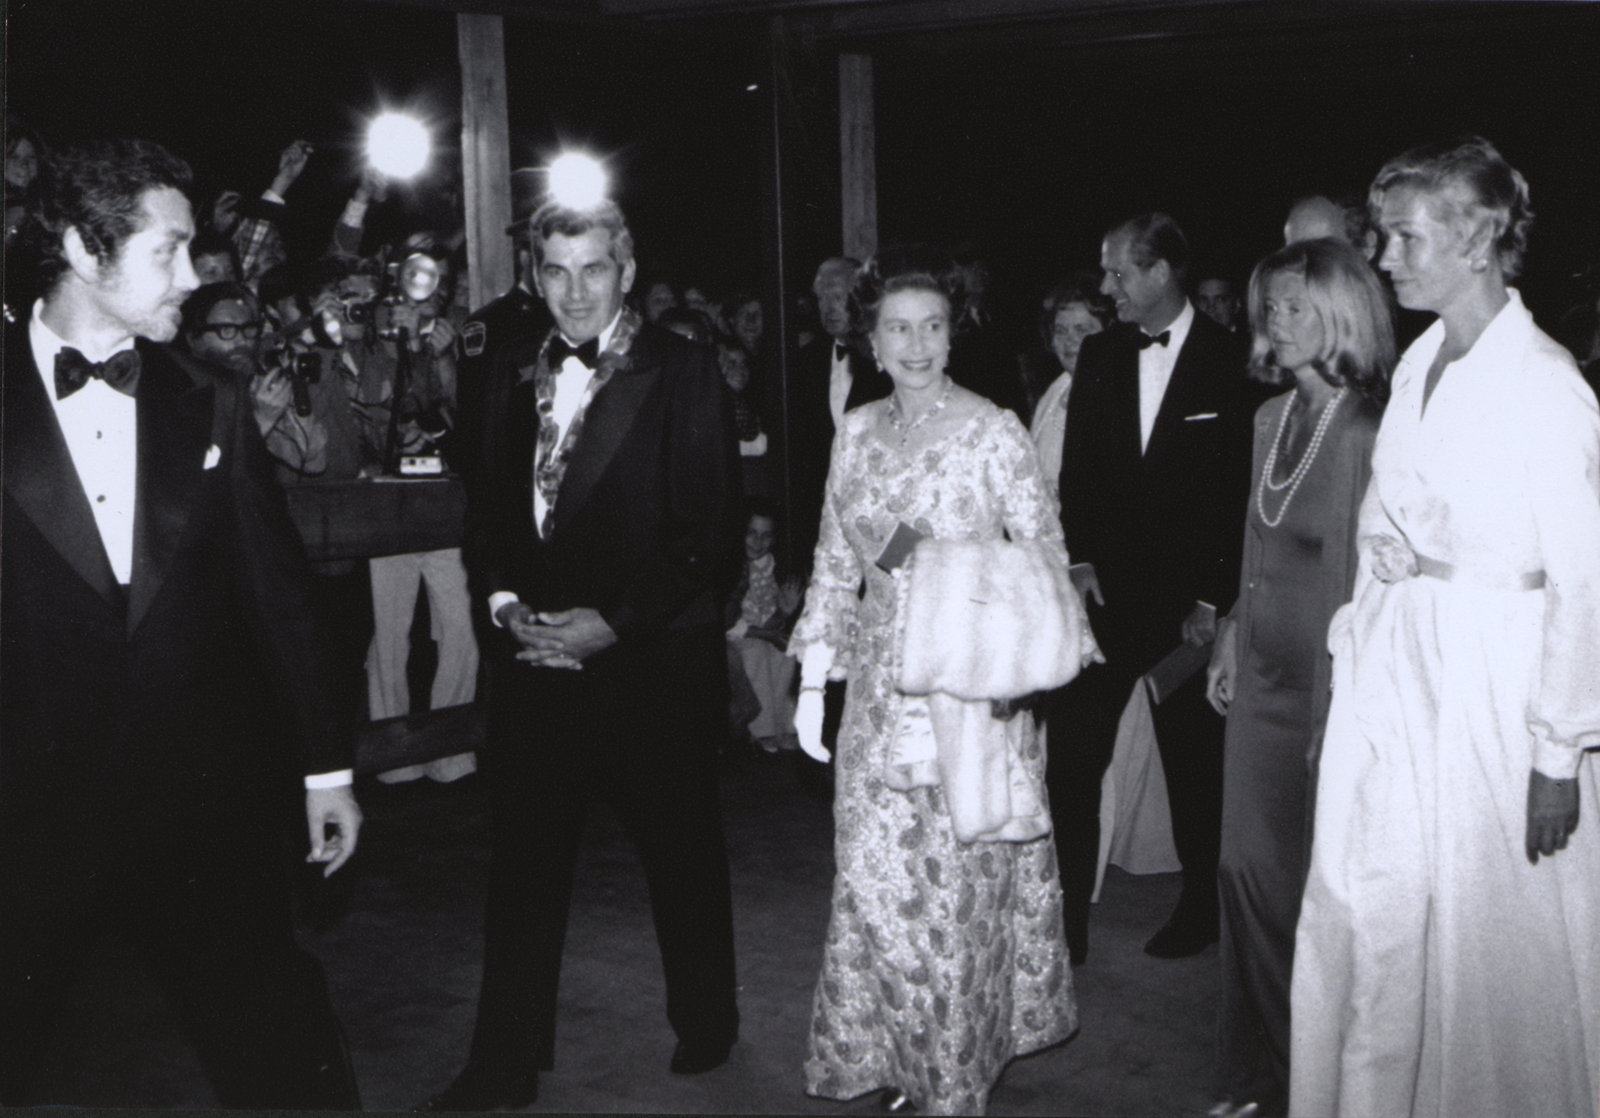 Queen Elizabeth II walks with Jacob Froese, Lord Mayor of Niagara-on-the-Lake, outside of Shaw Festival Theatre in Niagara-on-the-Lake, Ontario, on June 28, 1973. The queen died at the age of 96 on Thursday, Sept. 8, 2022.